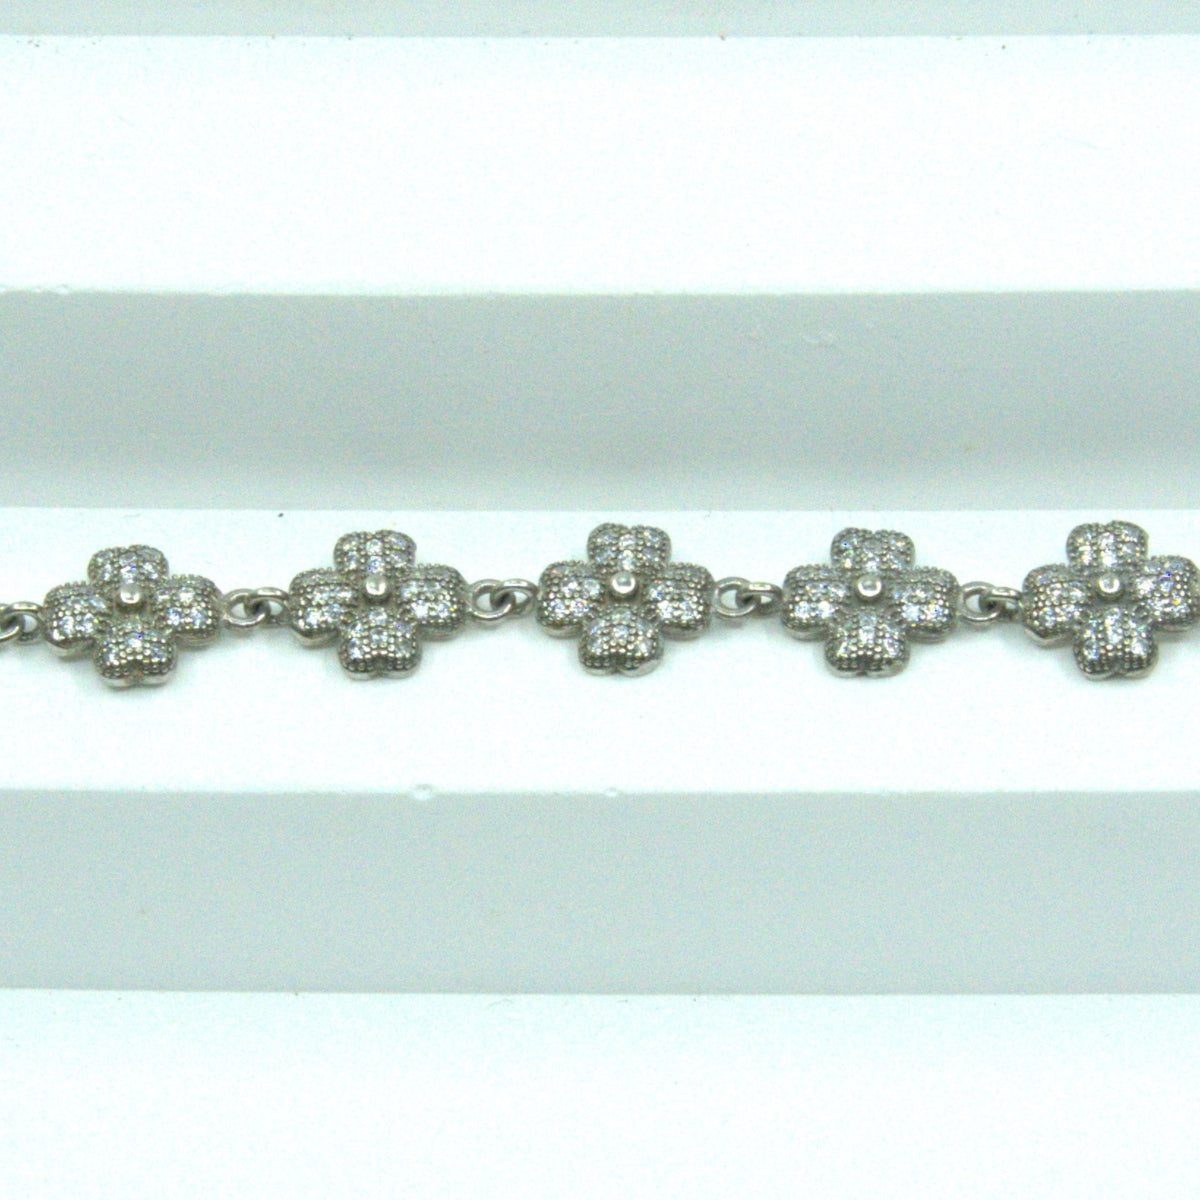 BRACELET- FAUCETED SILVER CLOVERS CHAIN